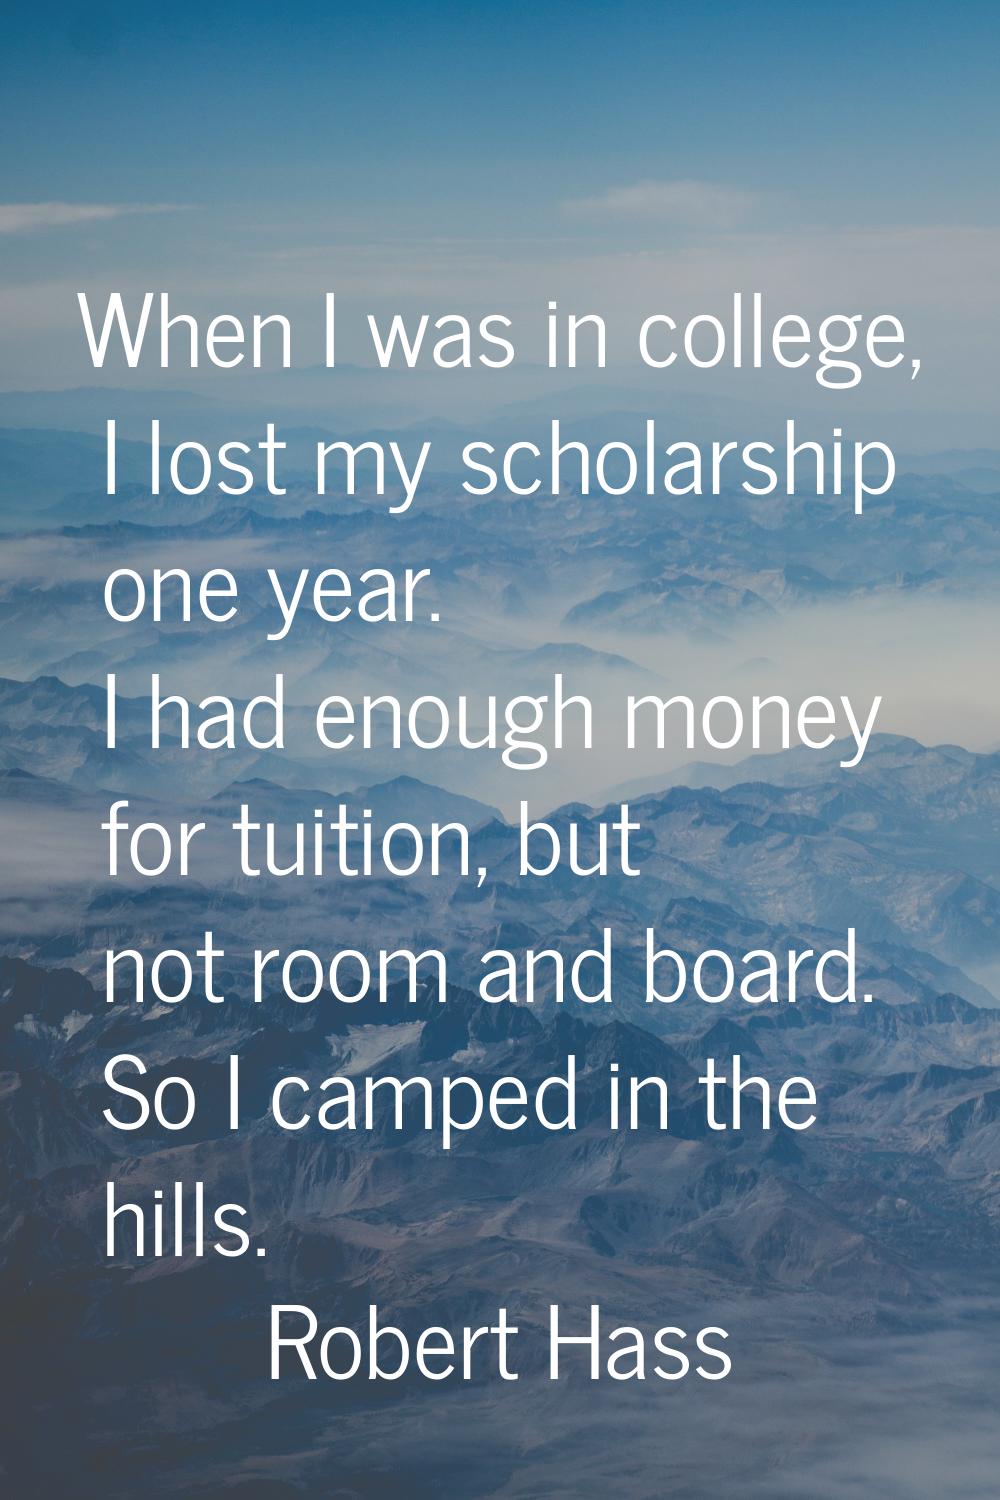 When I was in college, I lost my scholarship one year. I had enough money for tuition, but not room